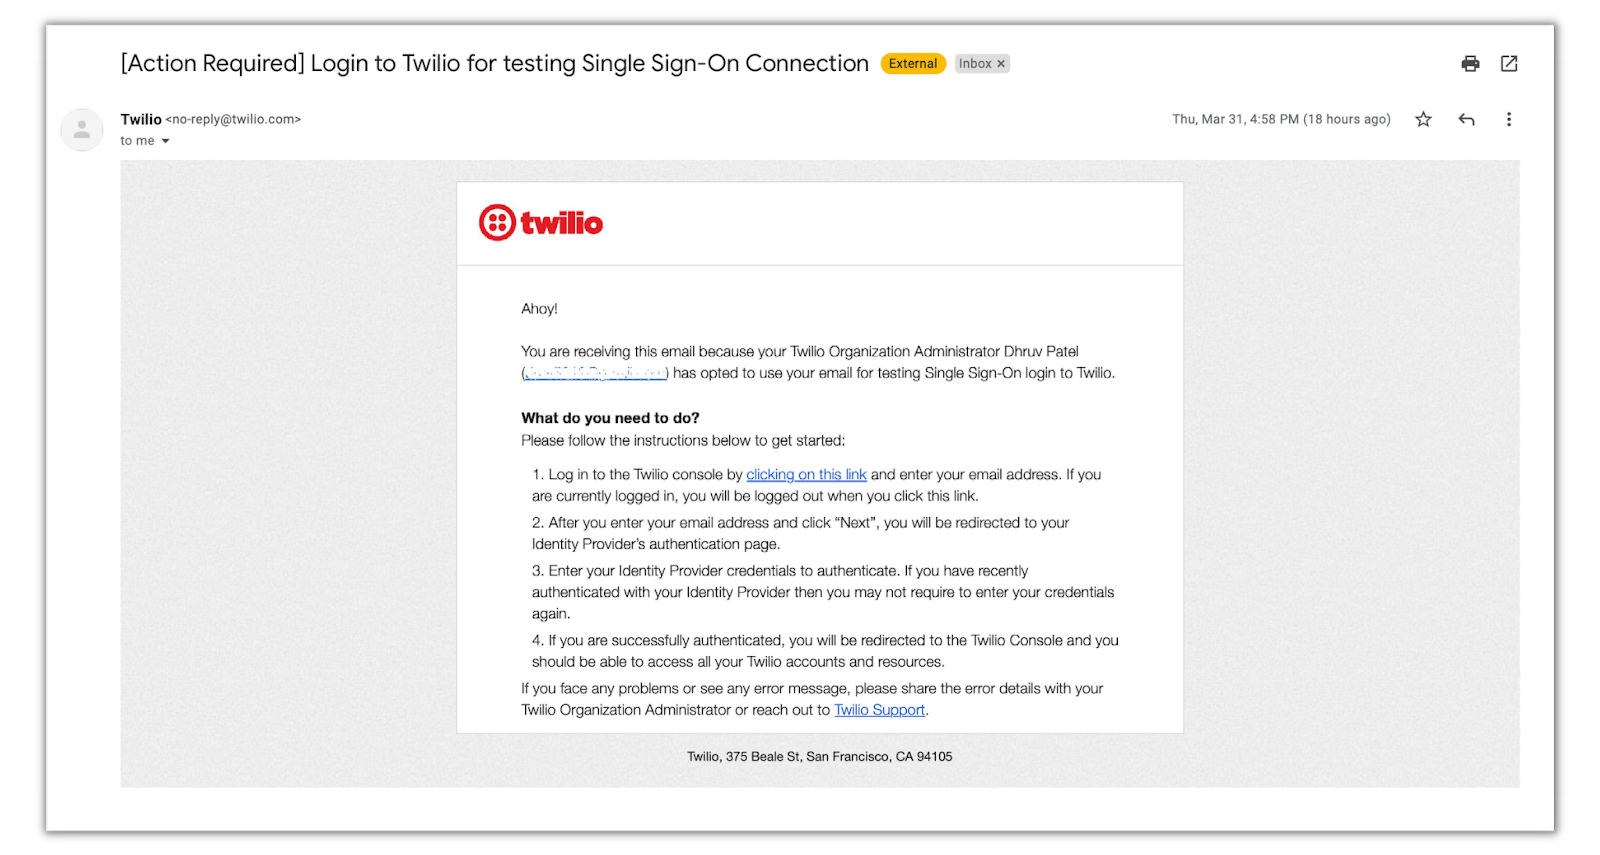 Email from Twilio asking to test SSO connection